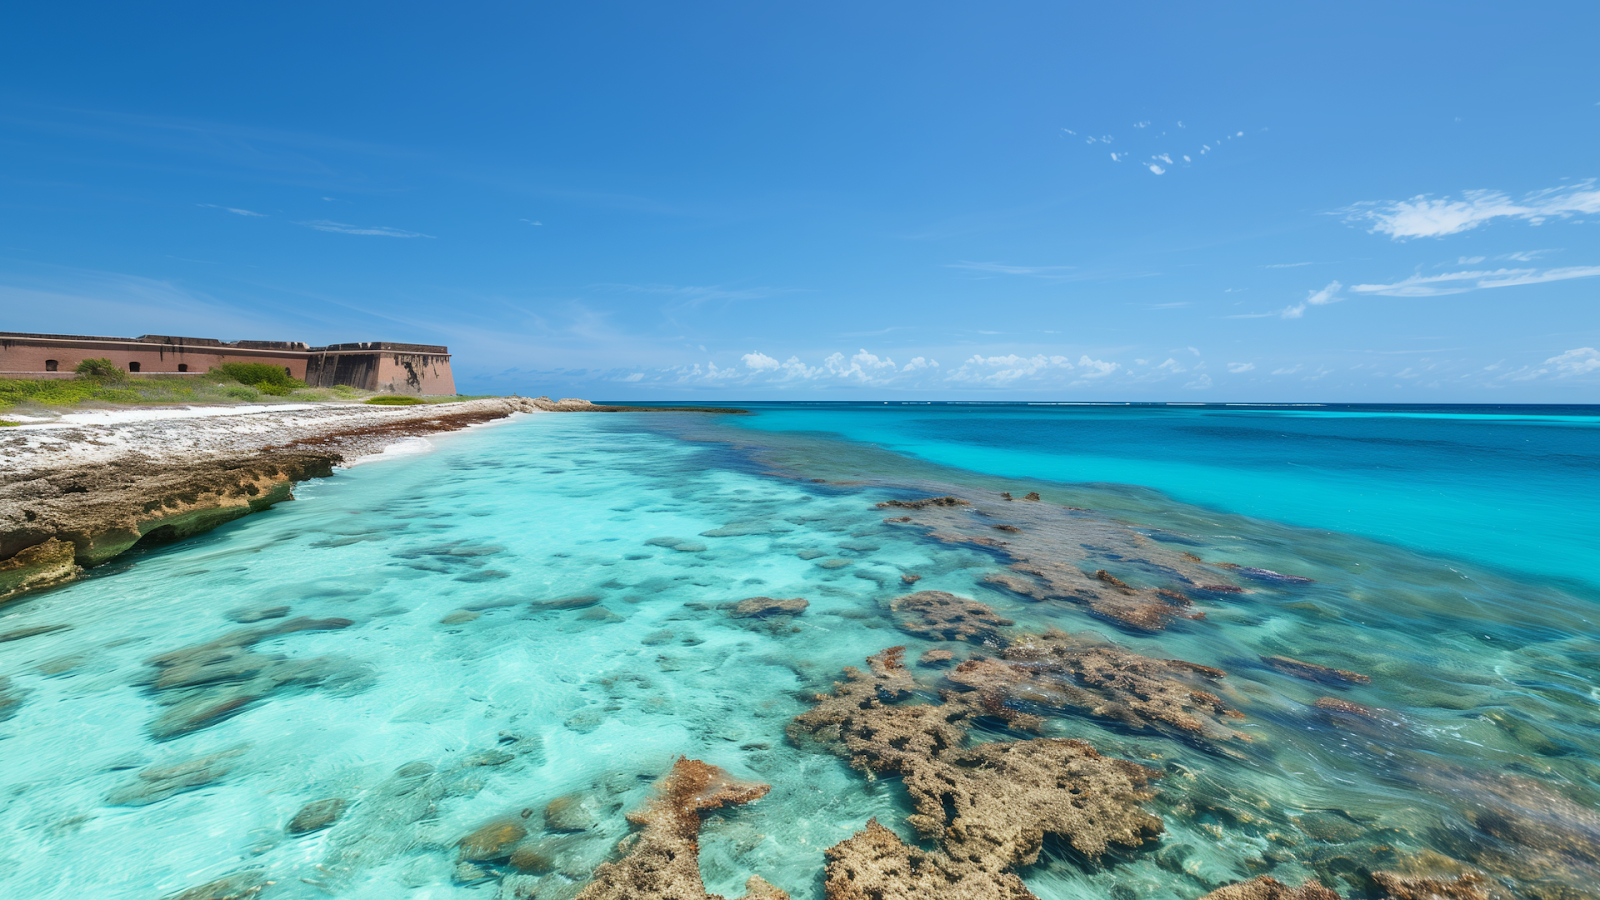 Medium shot view of Fort Jefferson amidst the crystal-clear waters of Dry Tortugas National Park, showcasing its secluded beauty.